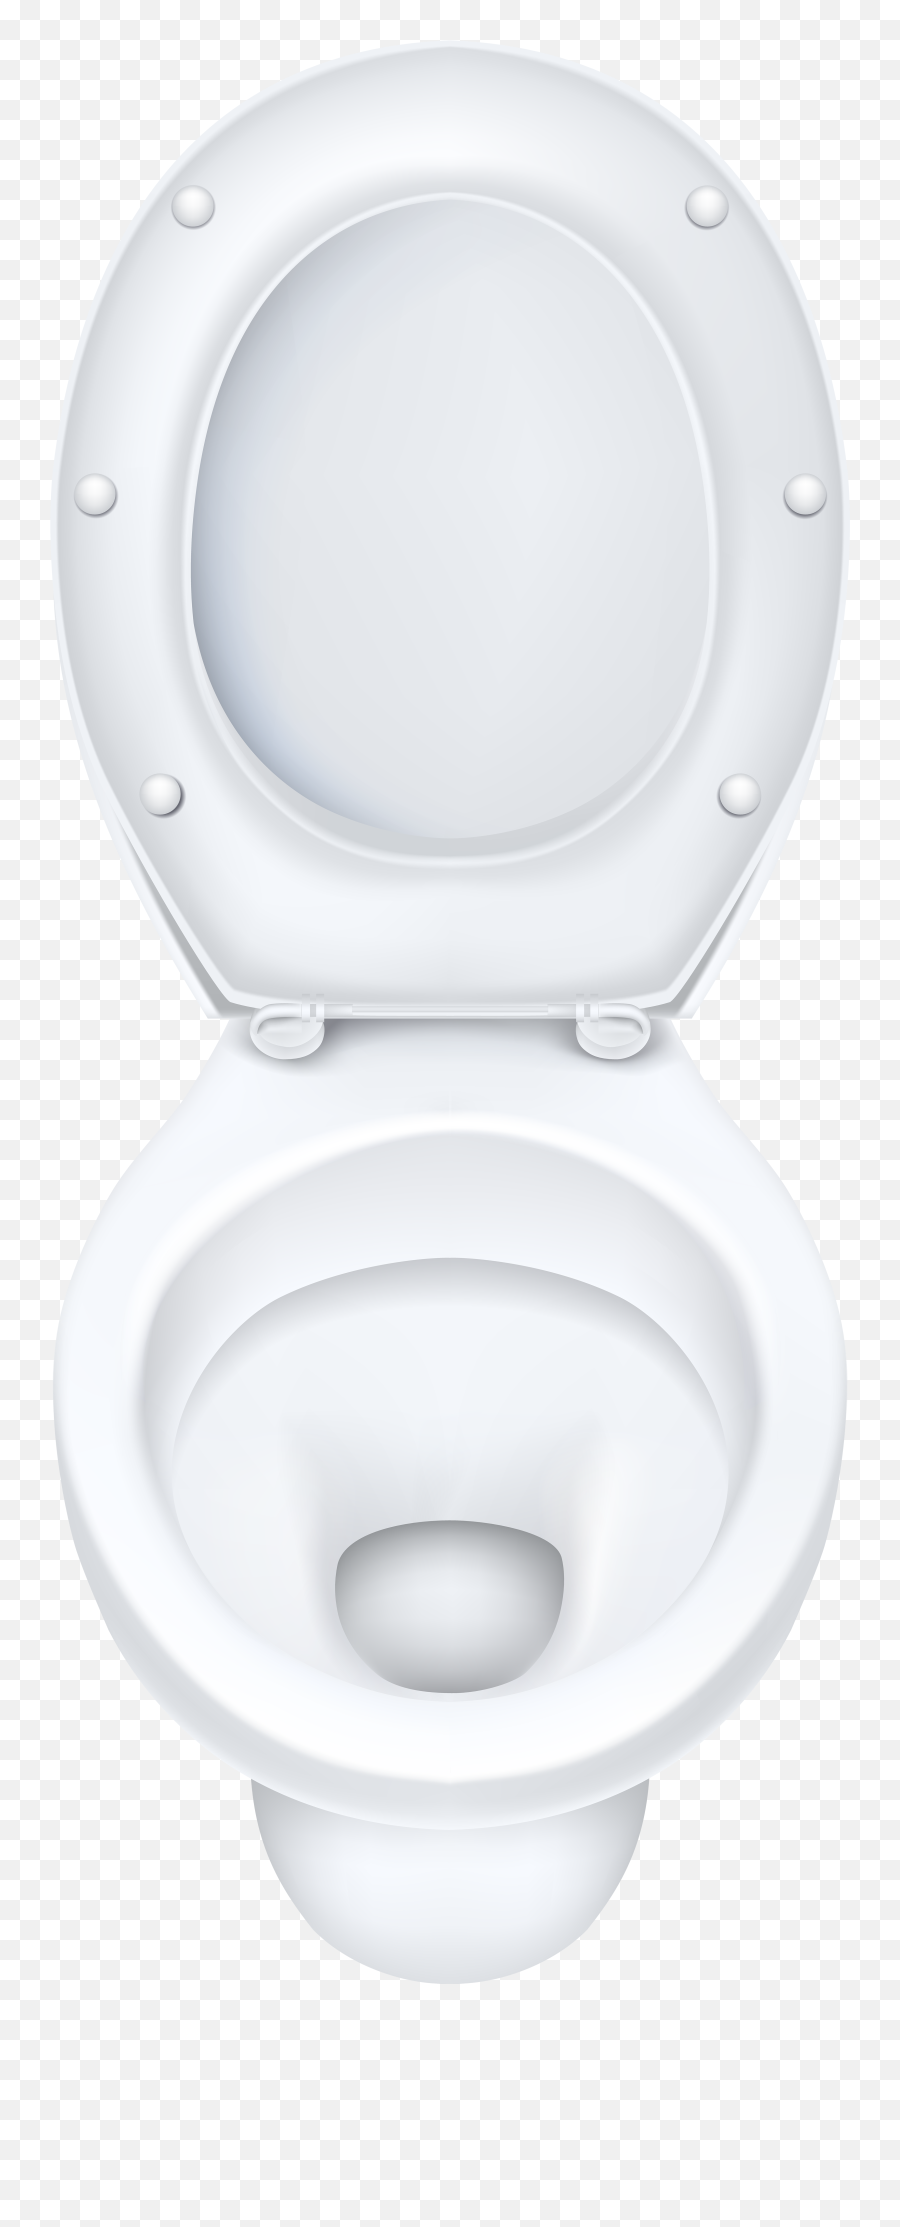 Library Of Toilet Bowl Jpg Transparent - Toilet Seat Png,Toilet Transparent Background